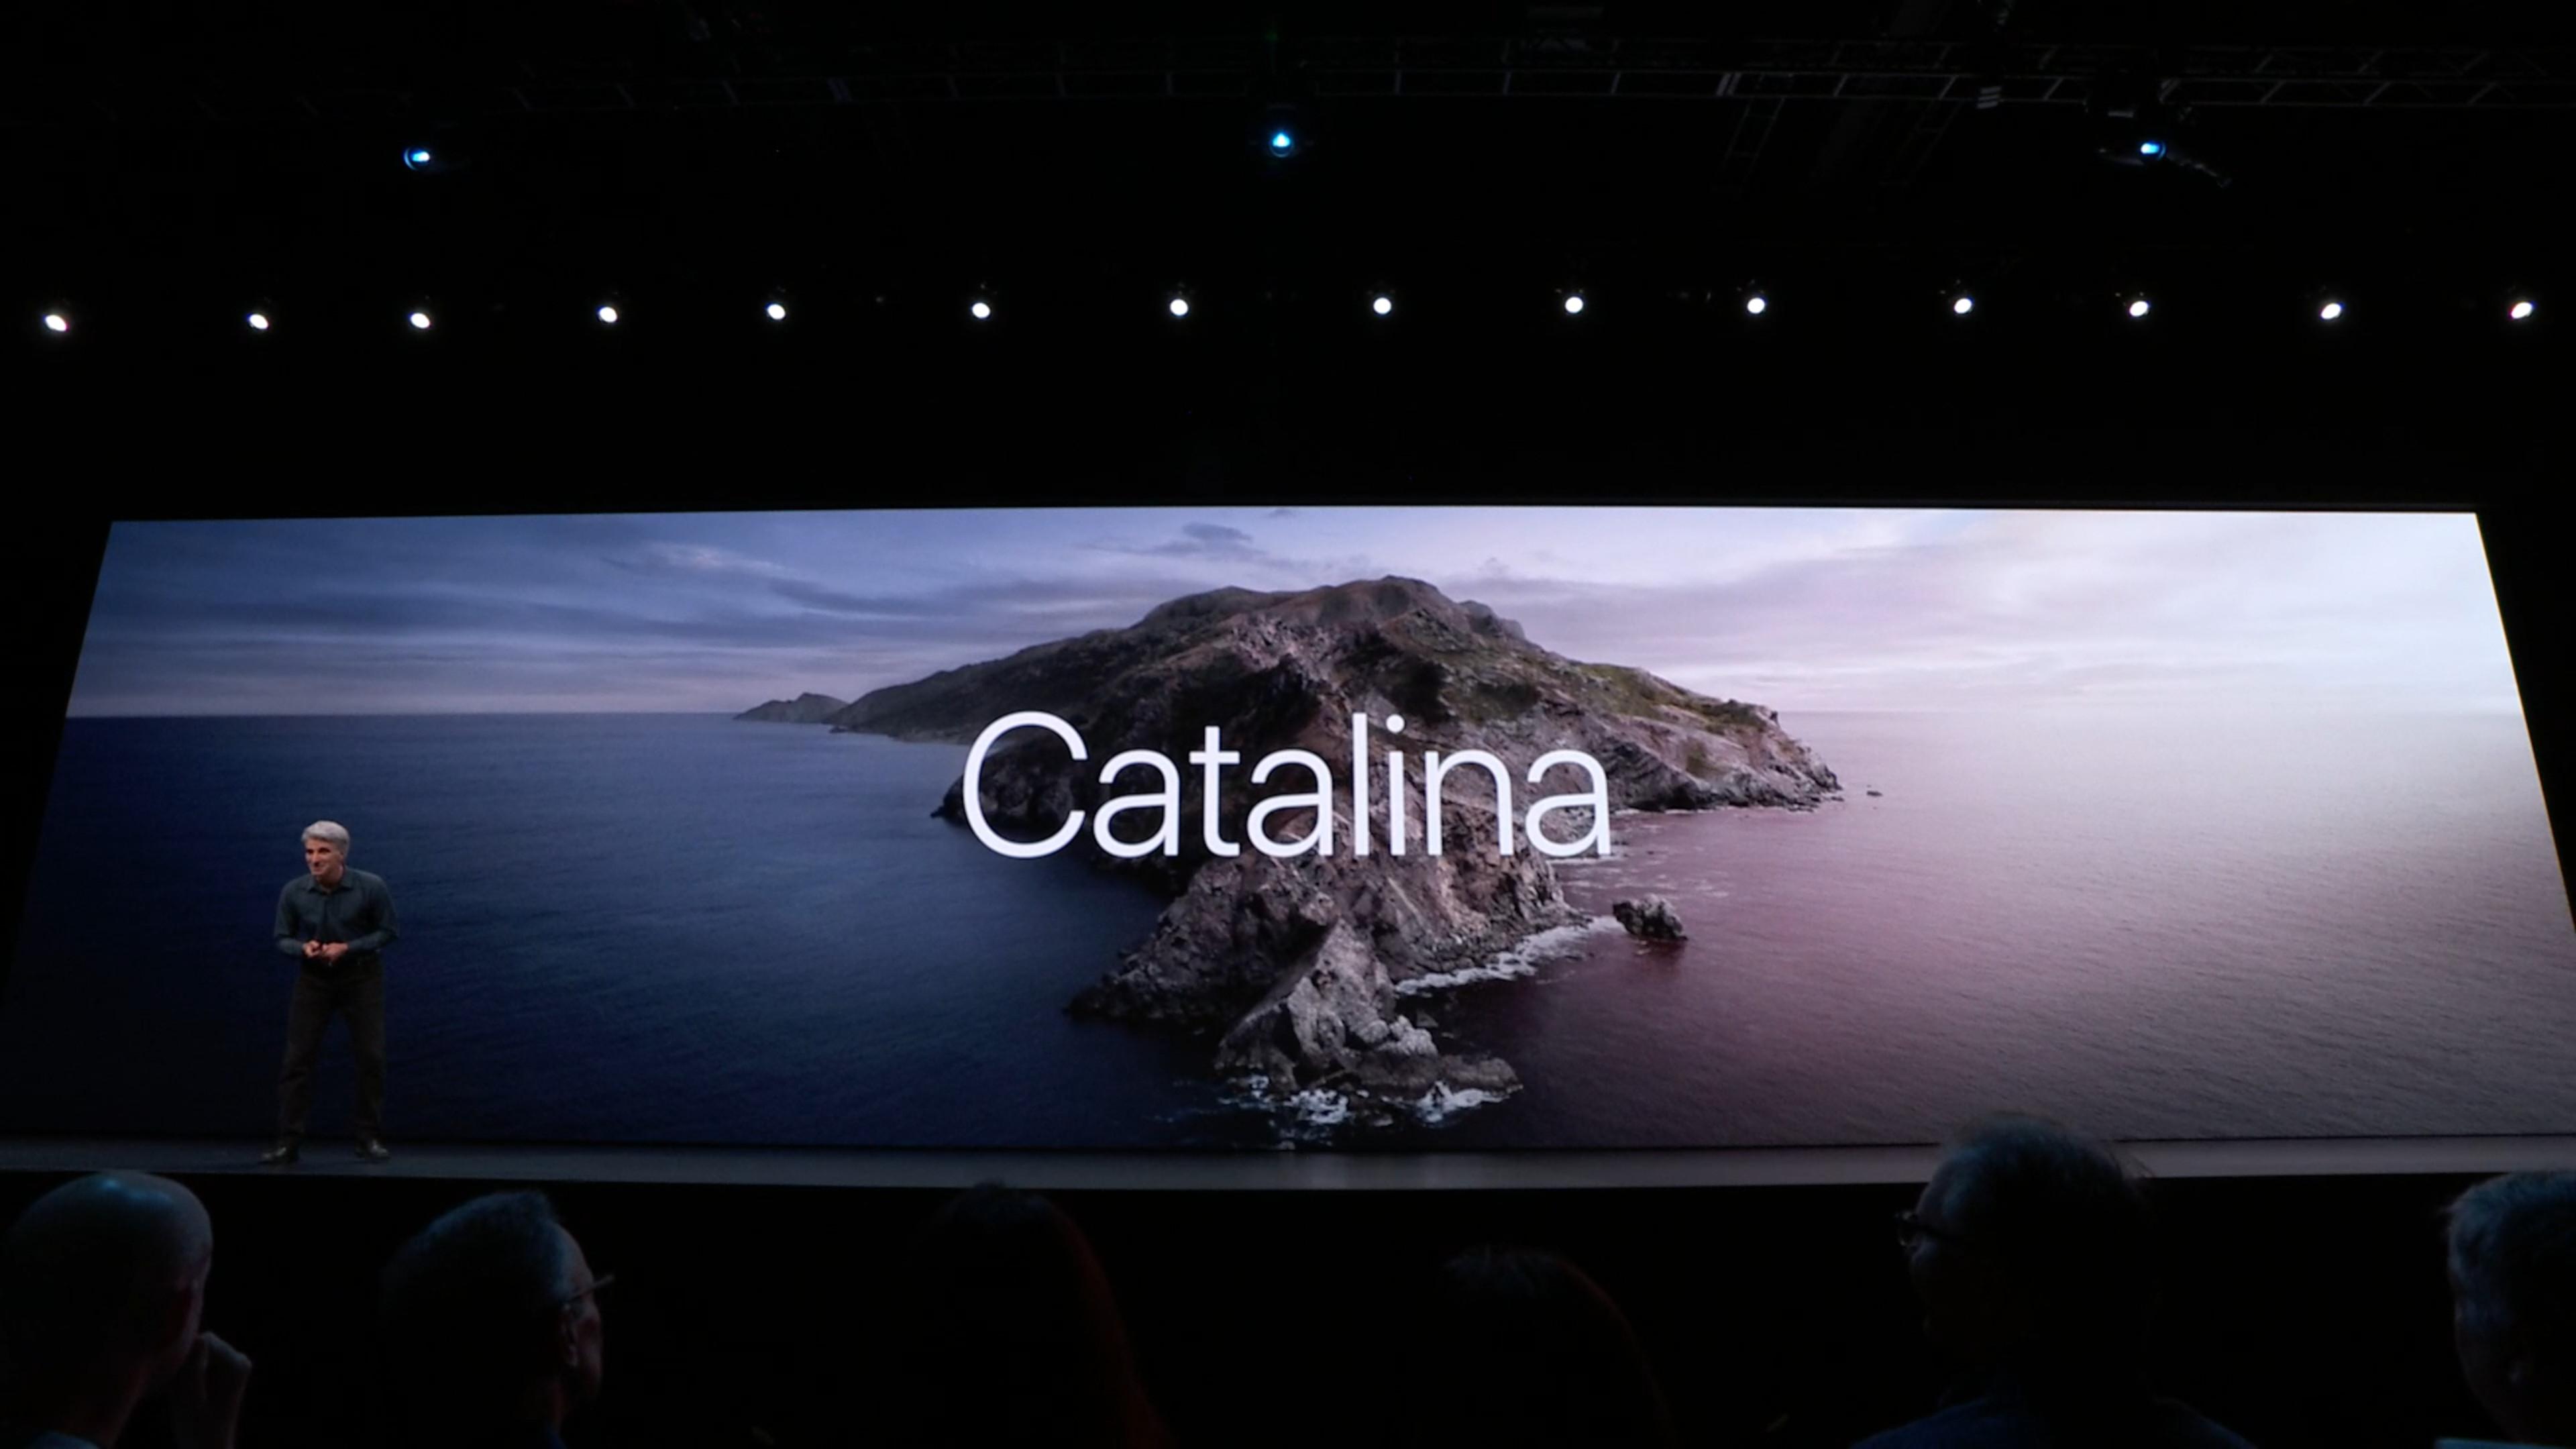 Apple announces macOS 10.15 Catalina with iPad app support